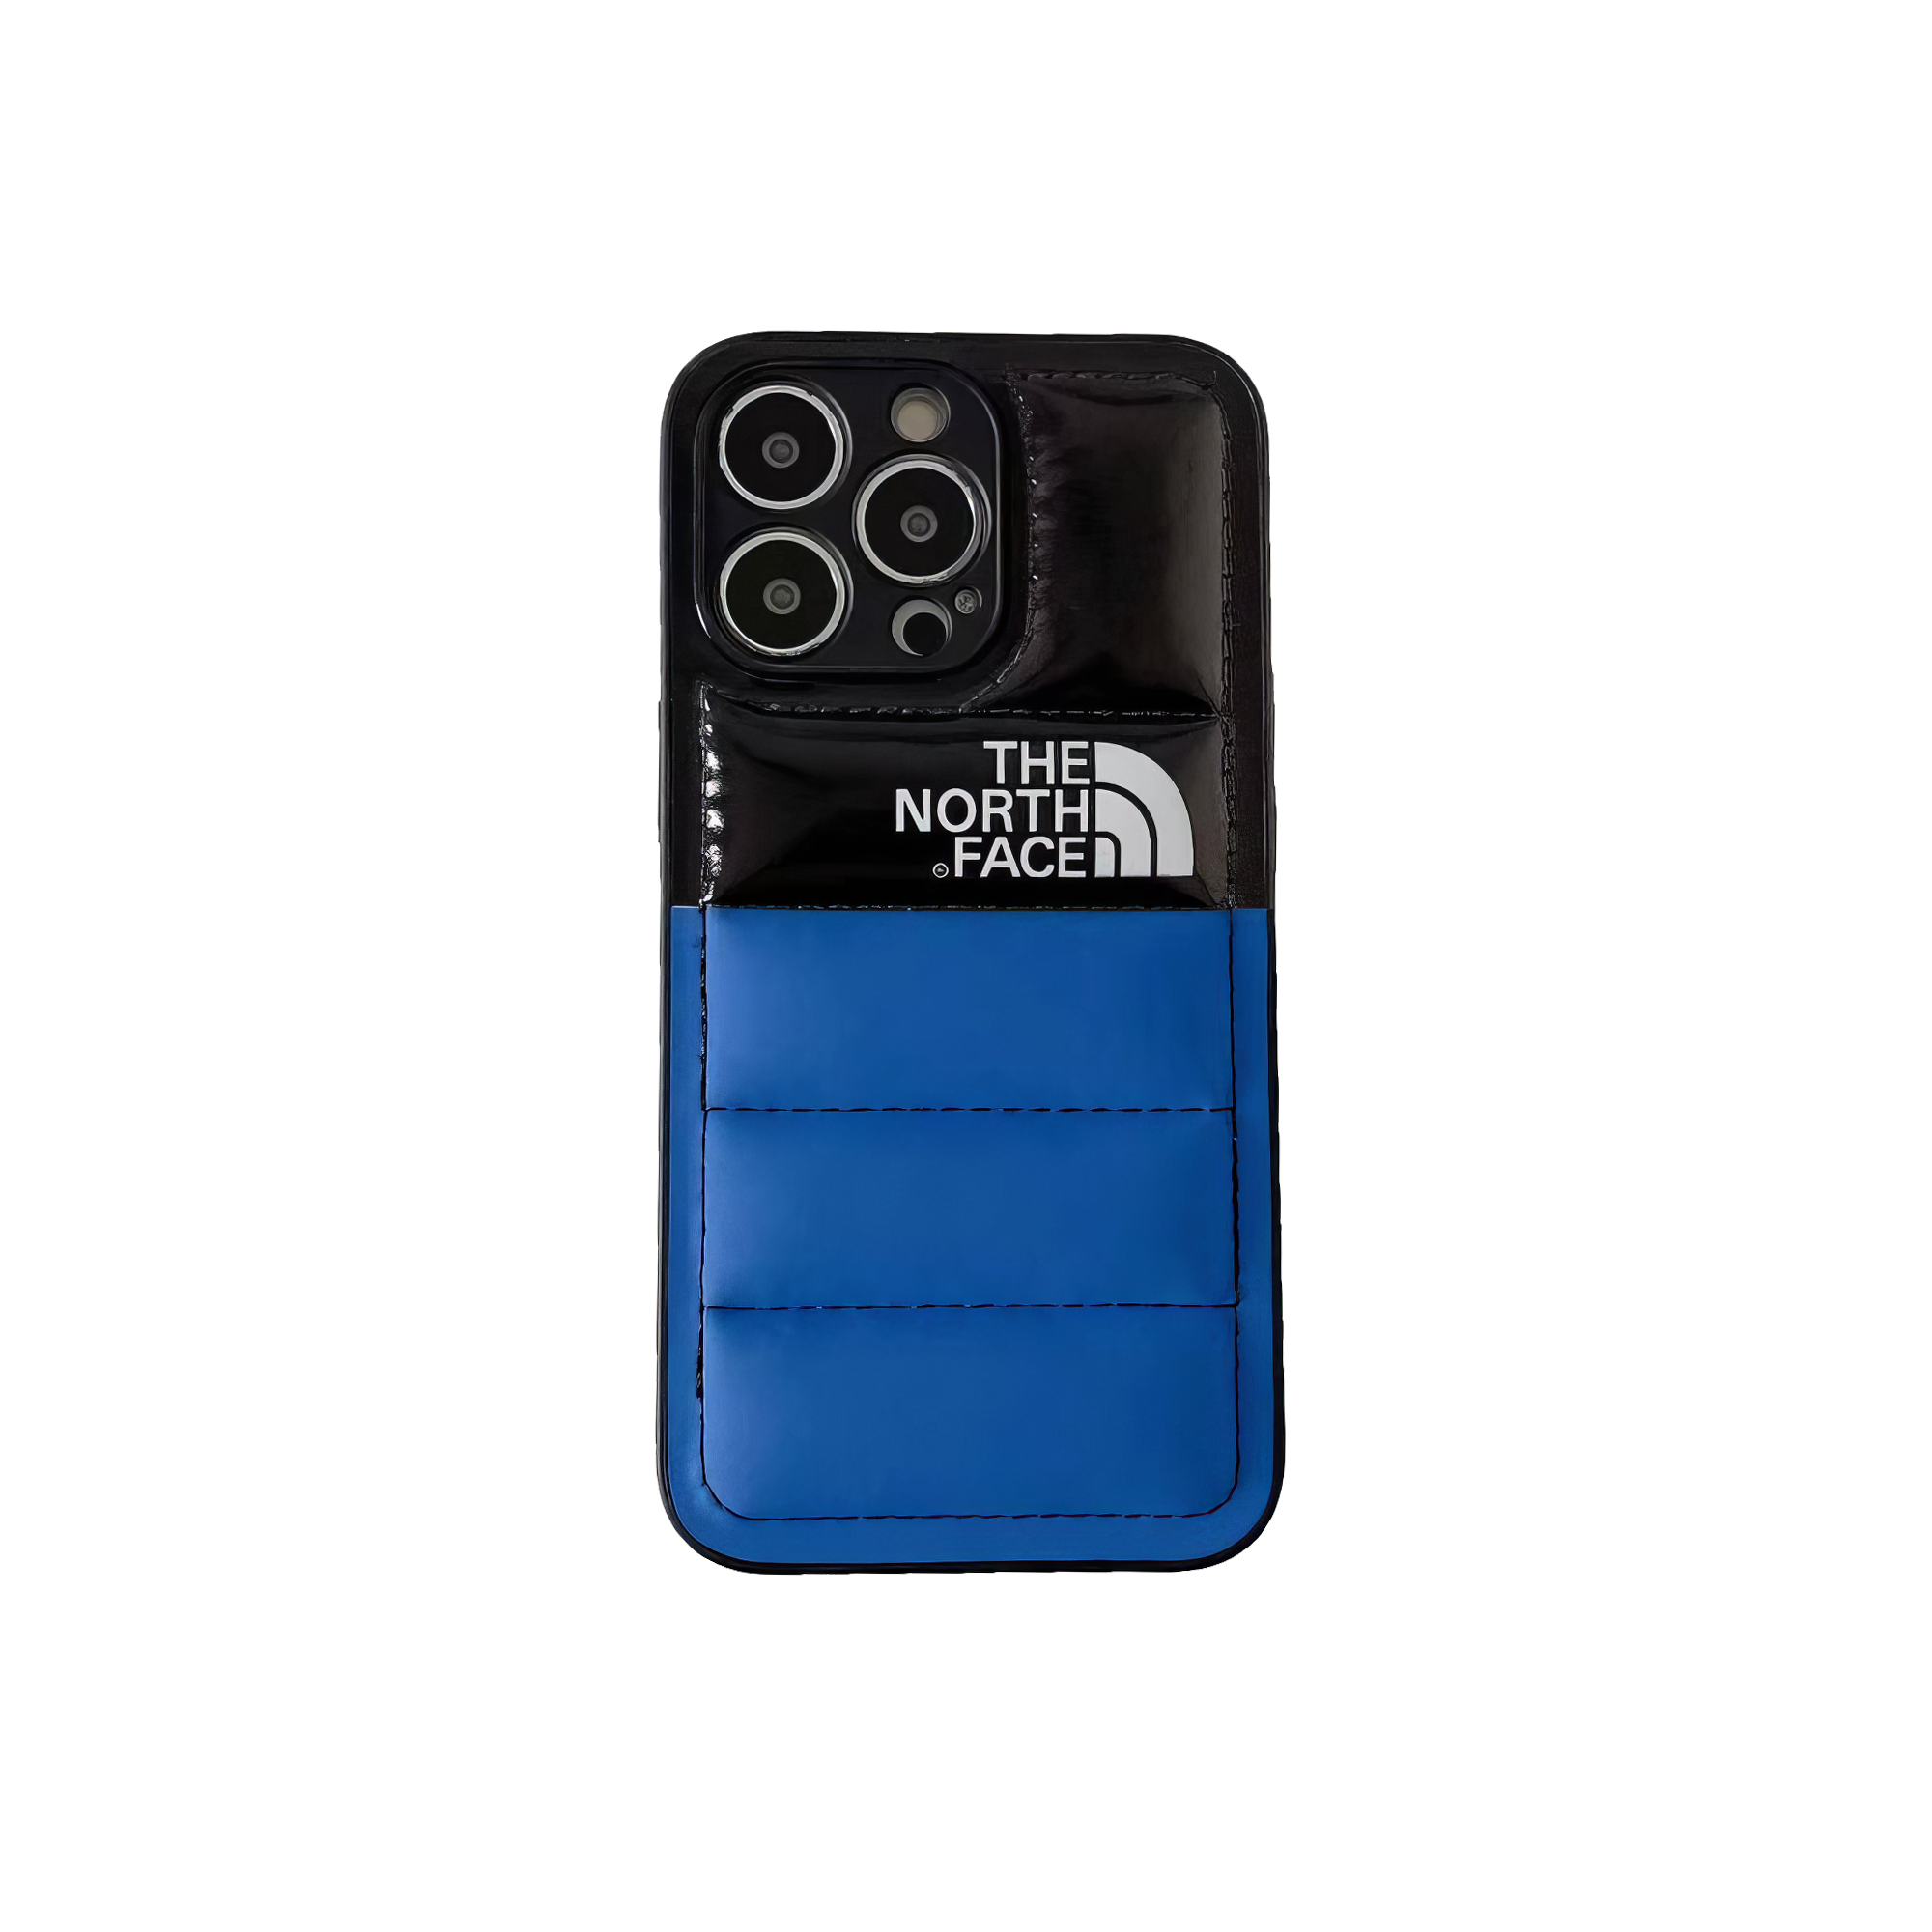 The North Face blue latex protective smartphone case.